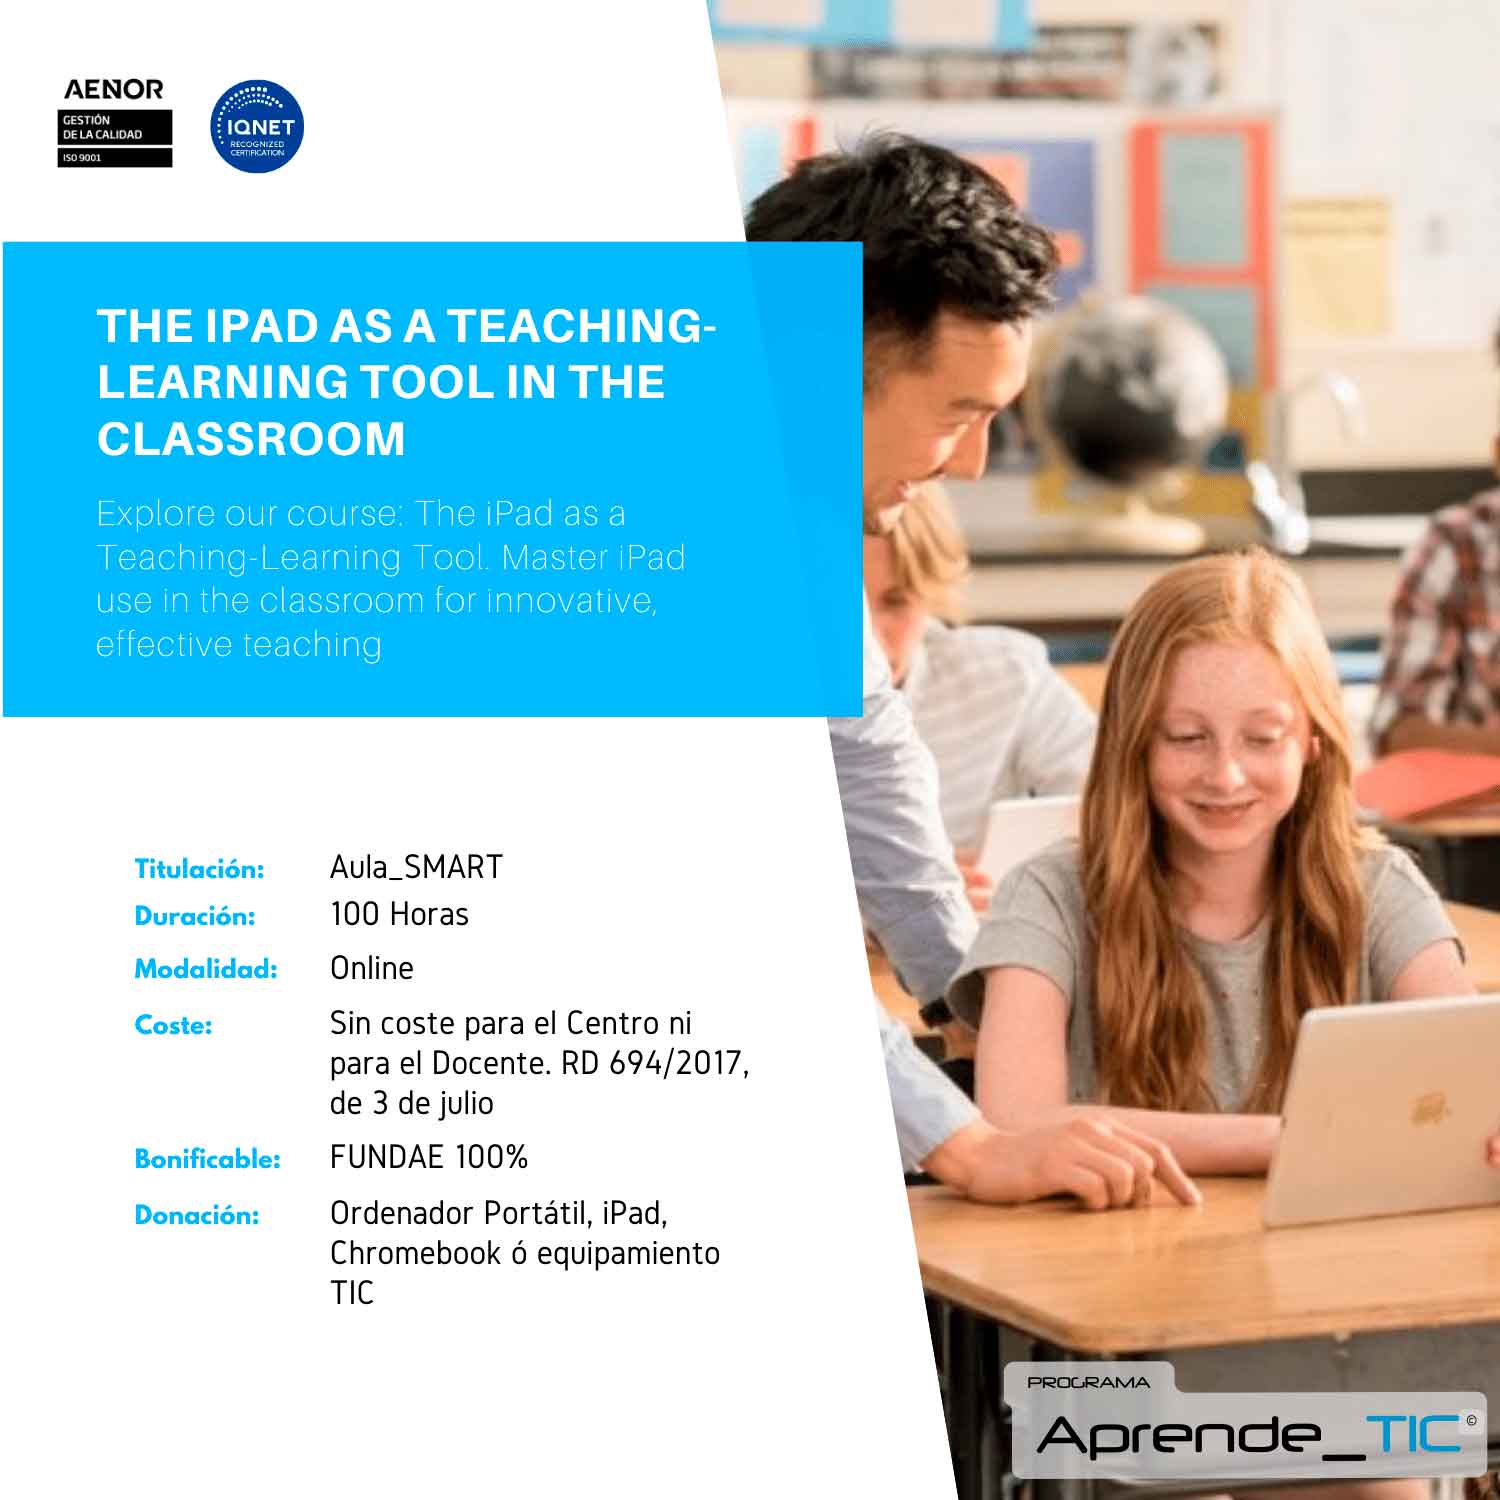 The iPad as a teaching-learning tool in the classroom